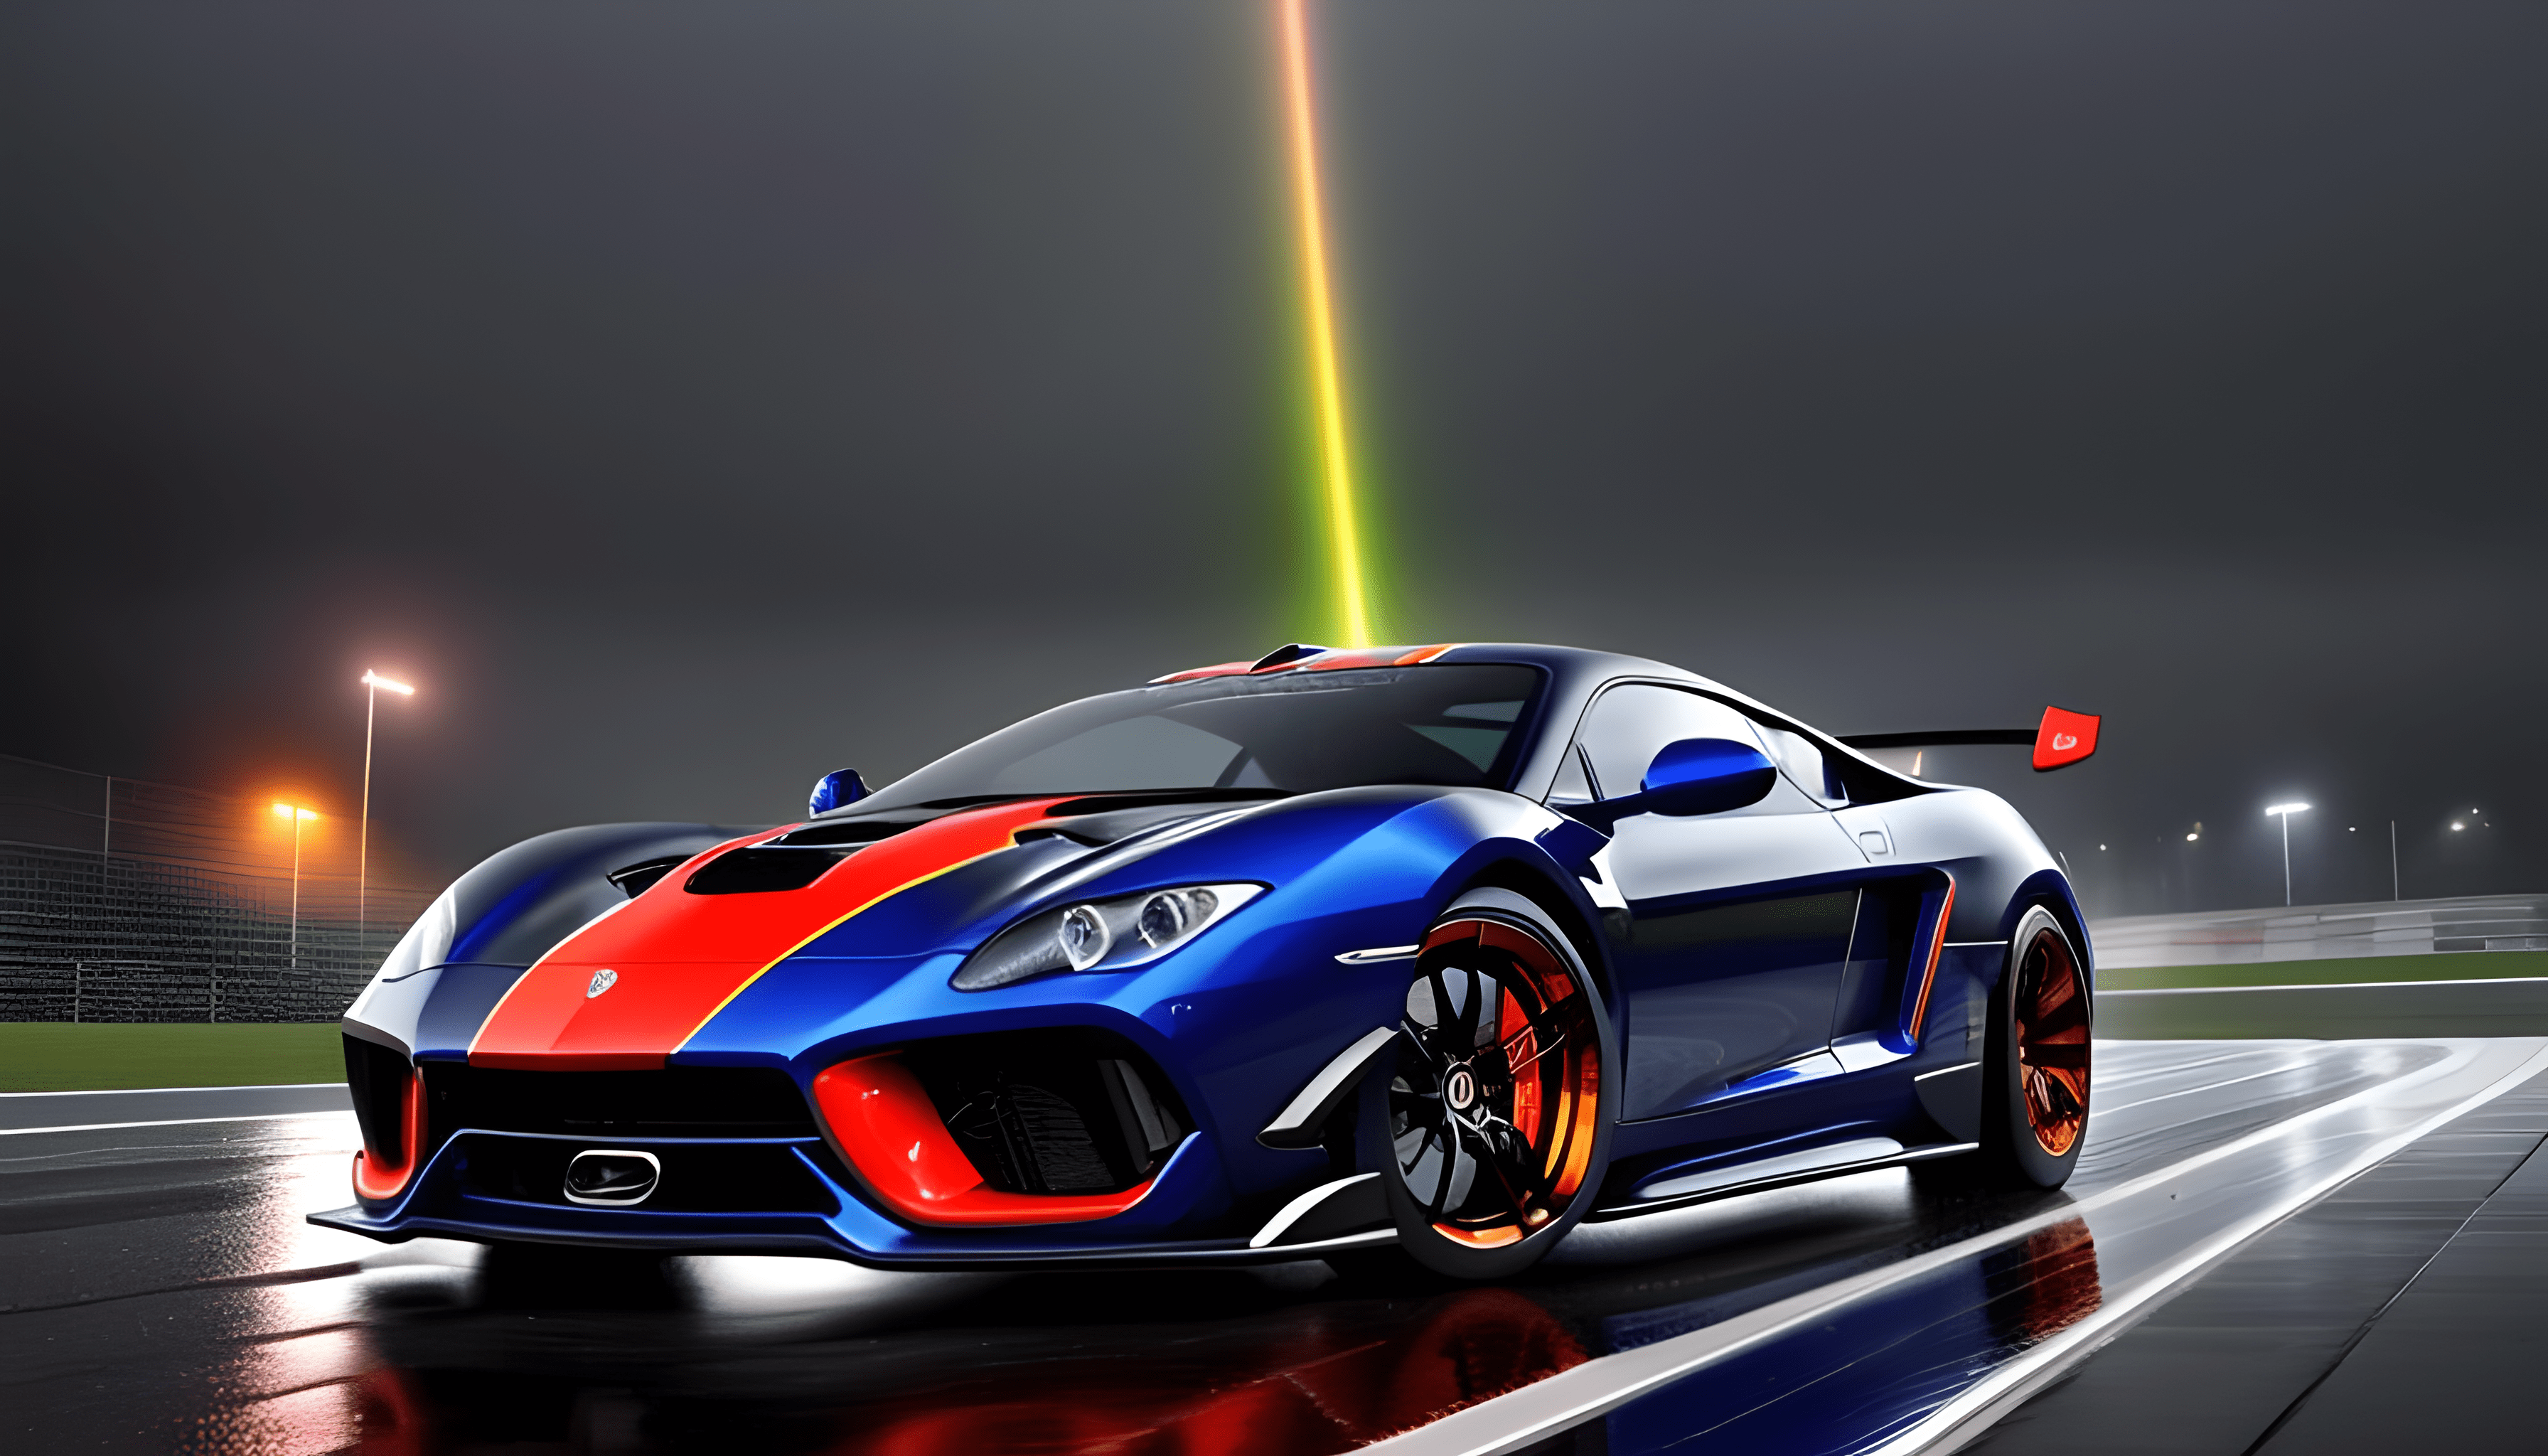 780+ Car HD Wallpapers and Backgrounds